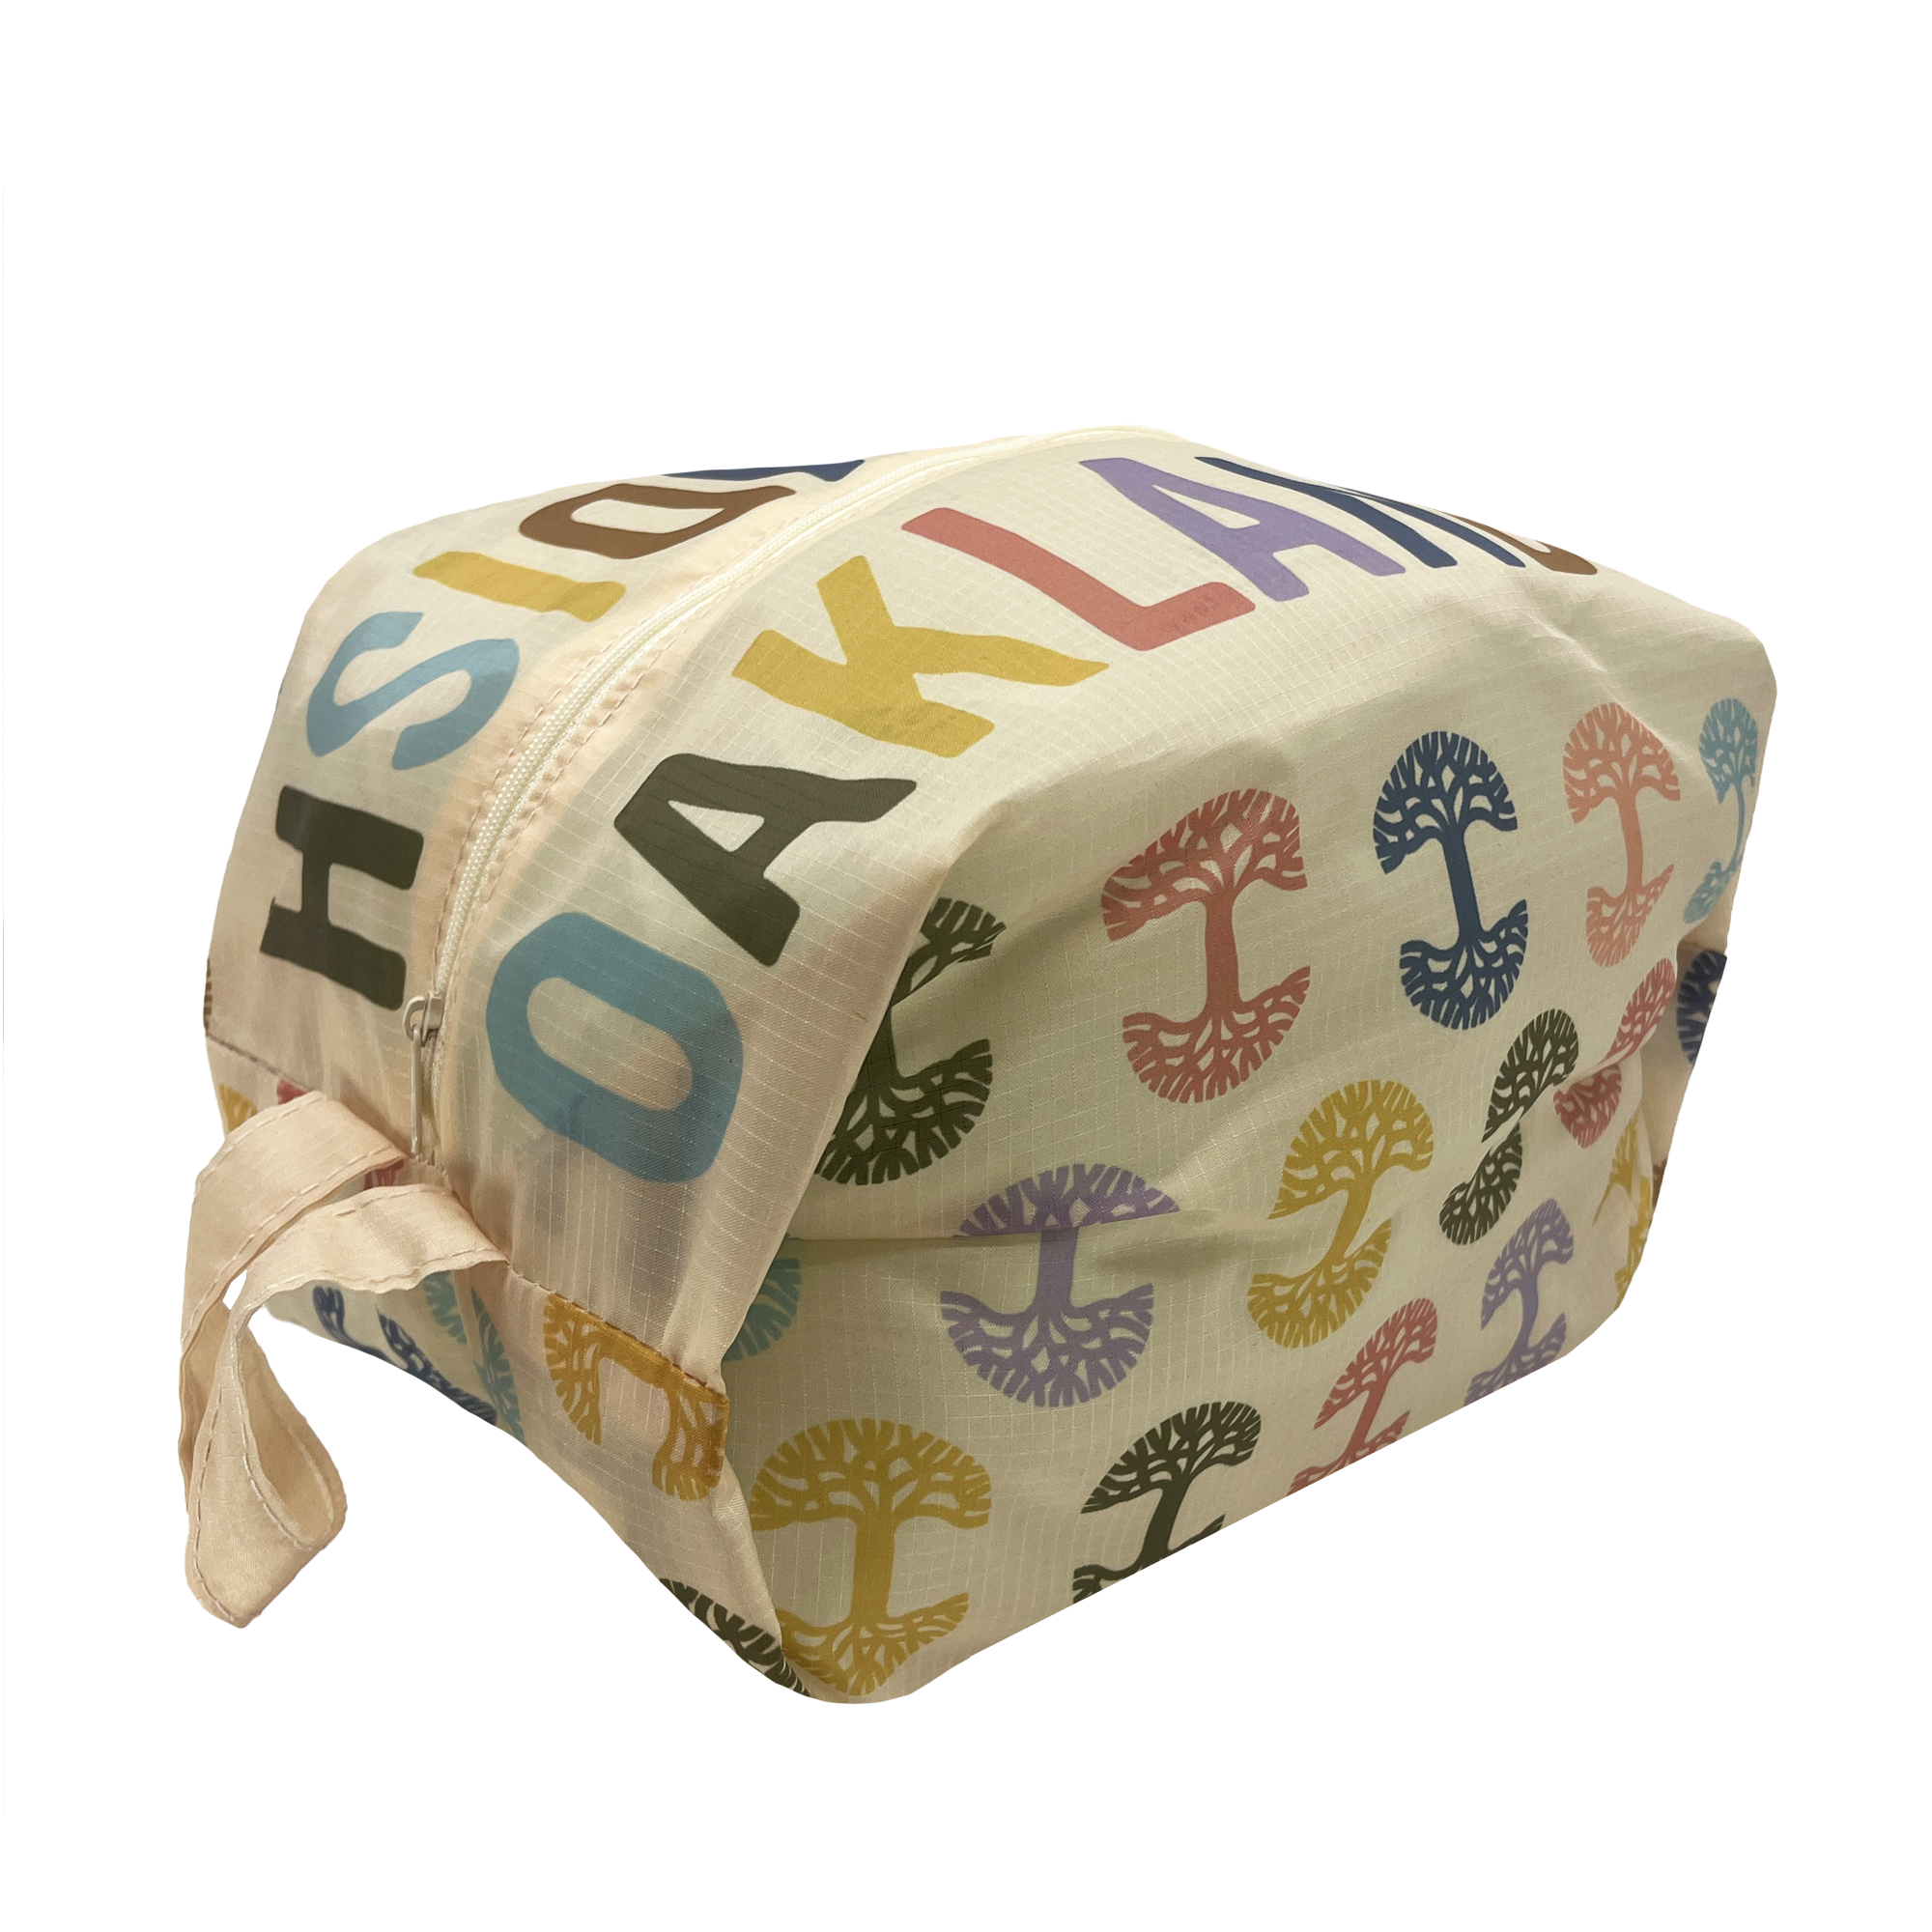 Side view of a large-sized natural-colored zippered collapsible toiletry dopp bag with multi-color Oaklandish tree logos on repeat.